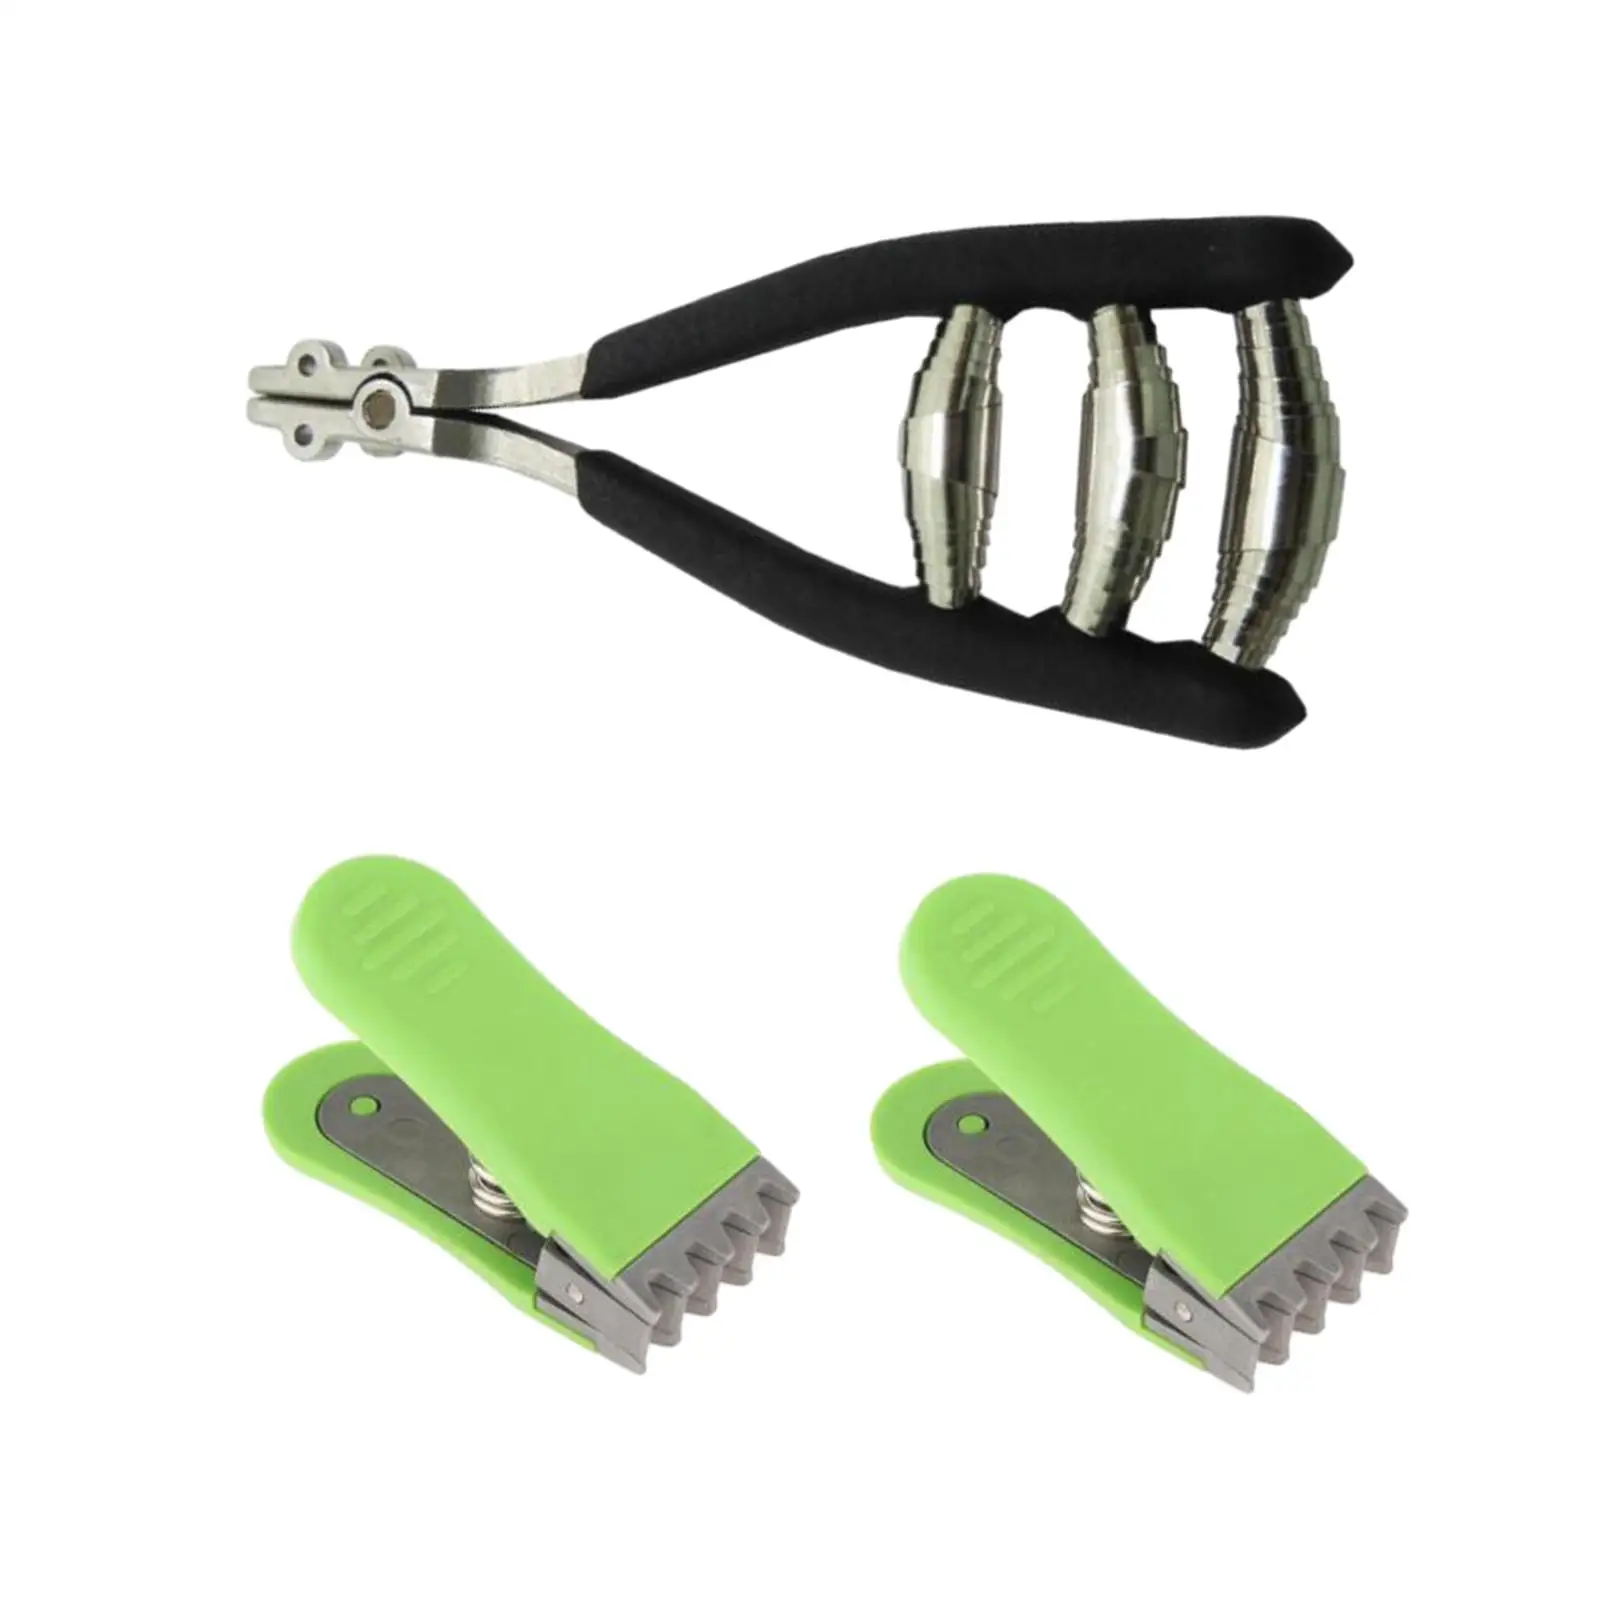 Starting Clamp Manual Accessories with Flying Clip Badminton Starting Stringing Clamp for Squash Badminton Racket Tennis Racquet